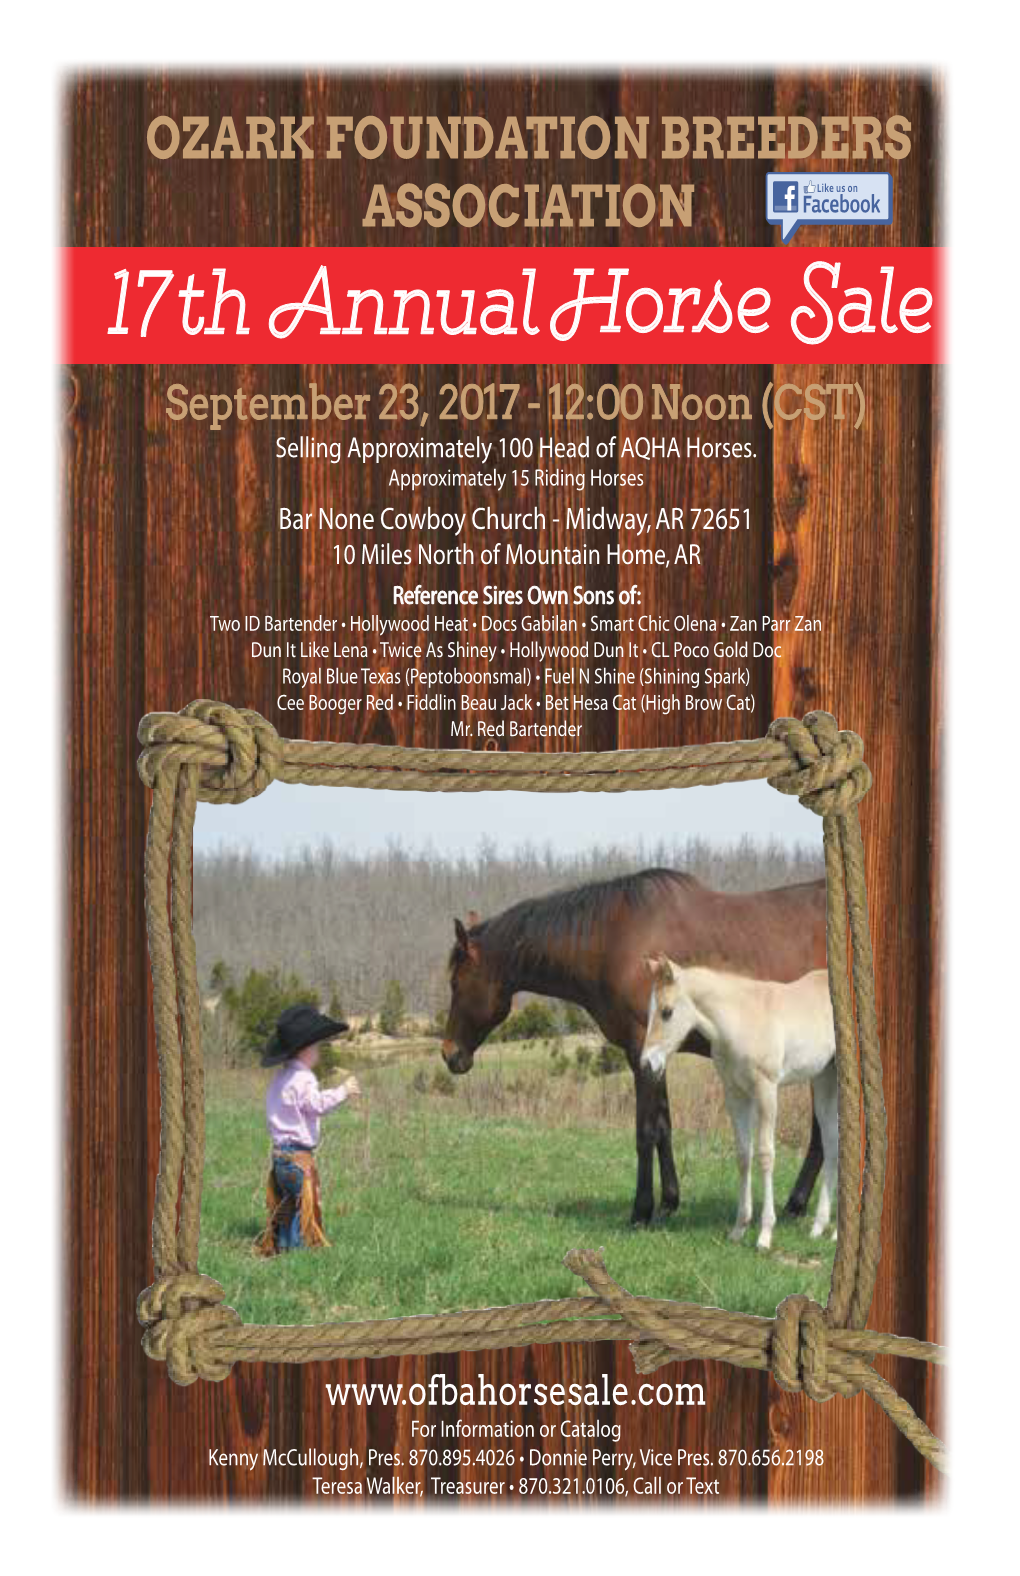 September 23, 2017 - 12:00 Noon (CST) Selling Approximately 100 Head of AQHA Horses